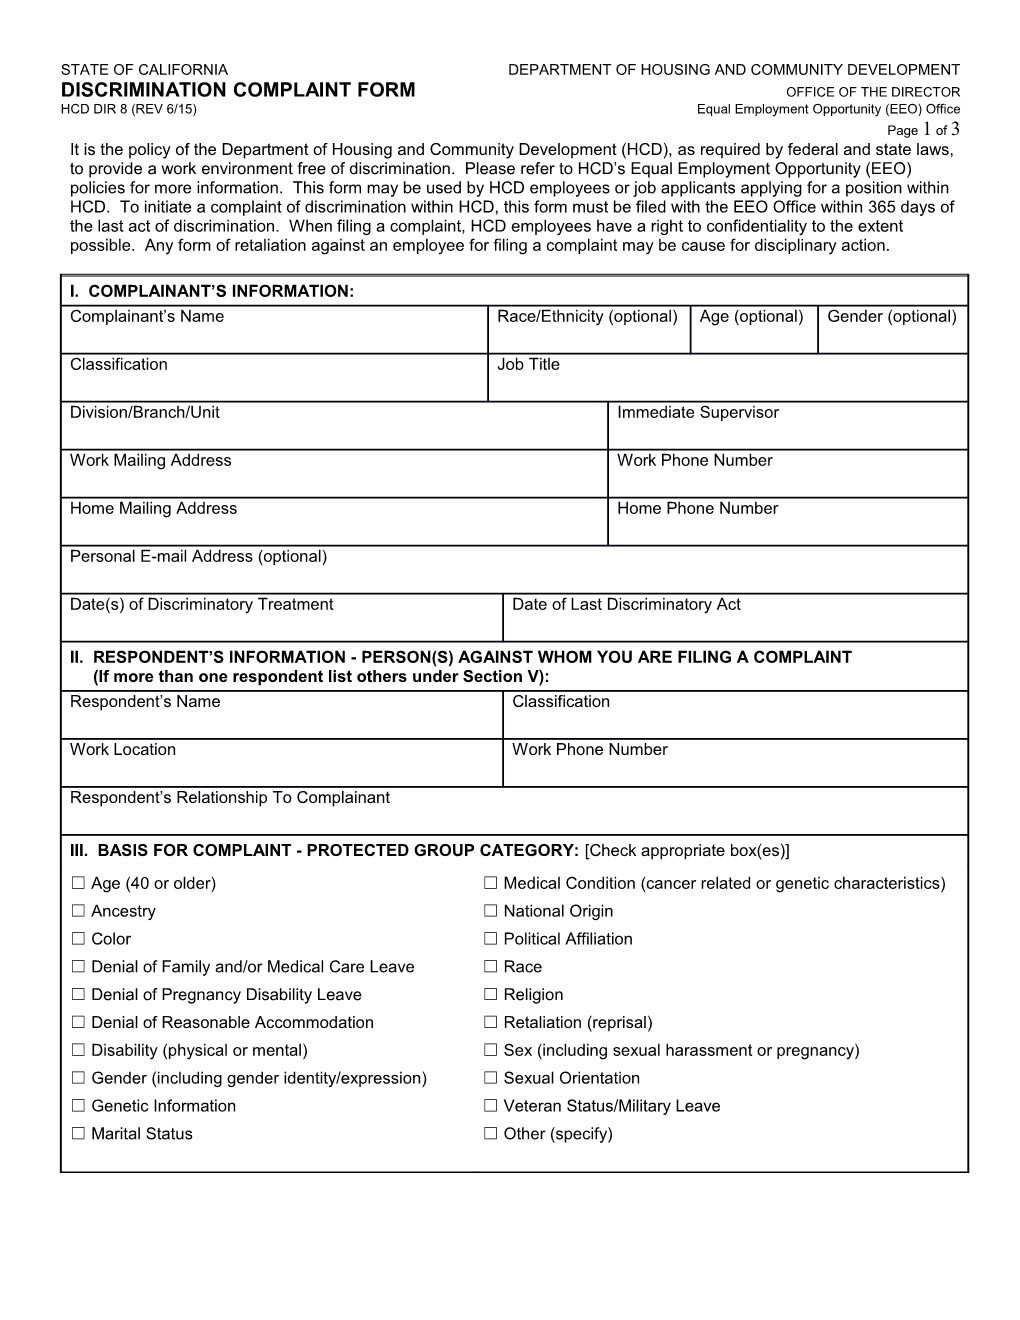 SECTION A: to BE COMPLETED by EMPLOYEE and SUPERVISOR (Please Print)